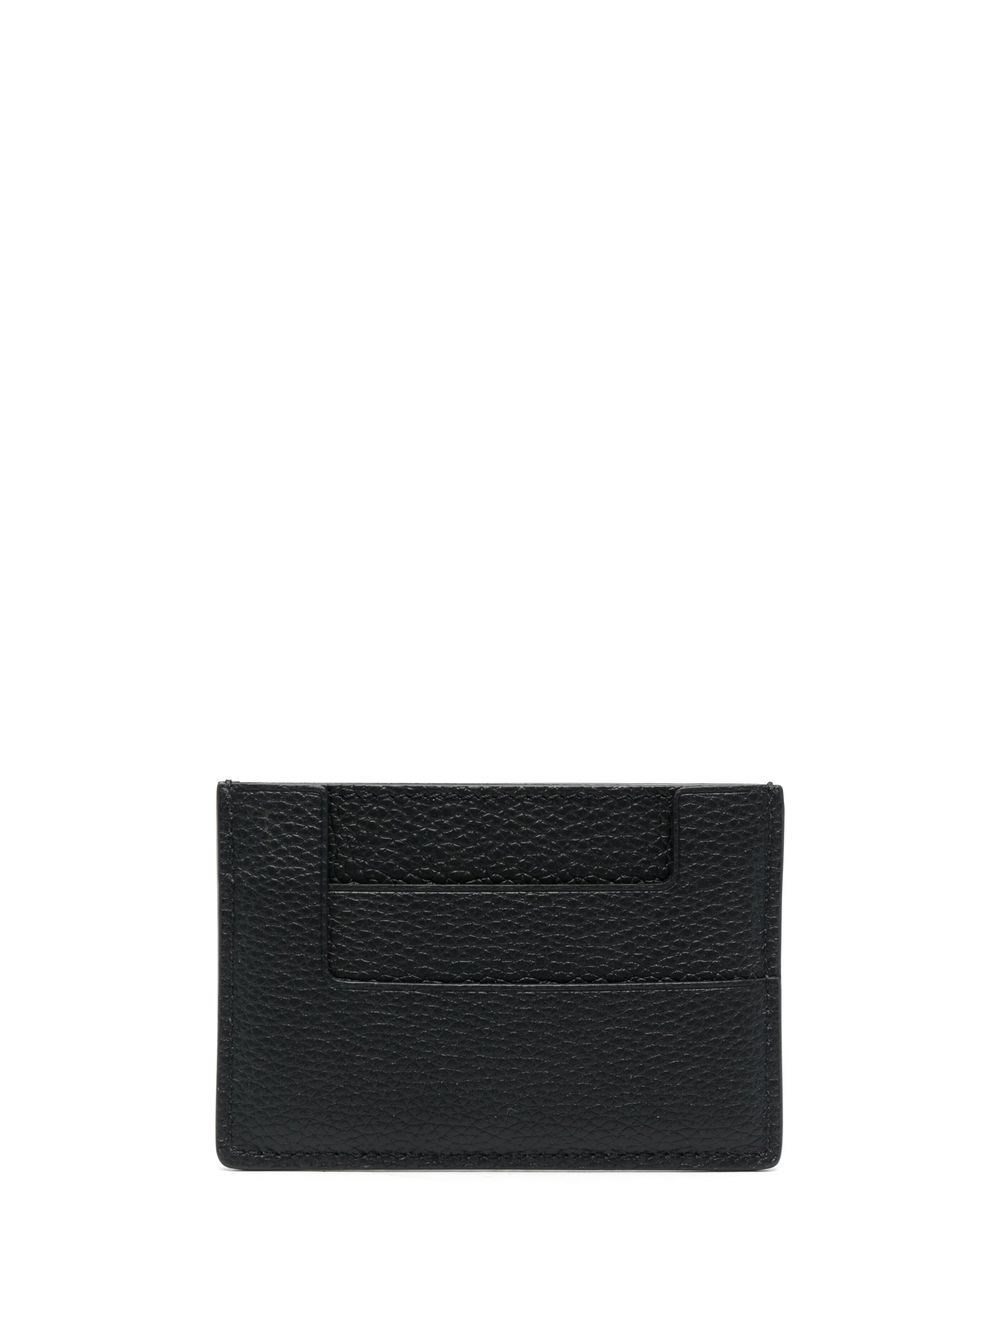 Tom Ford Card Holder With Tf Plate In Black